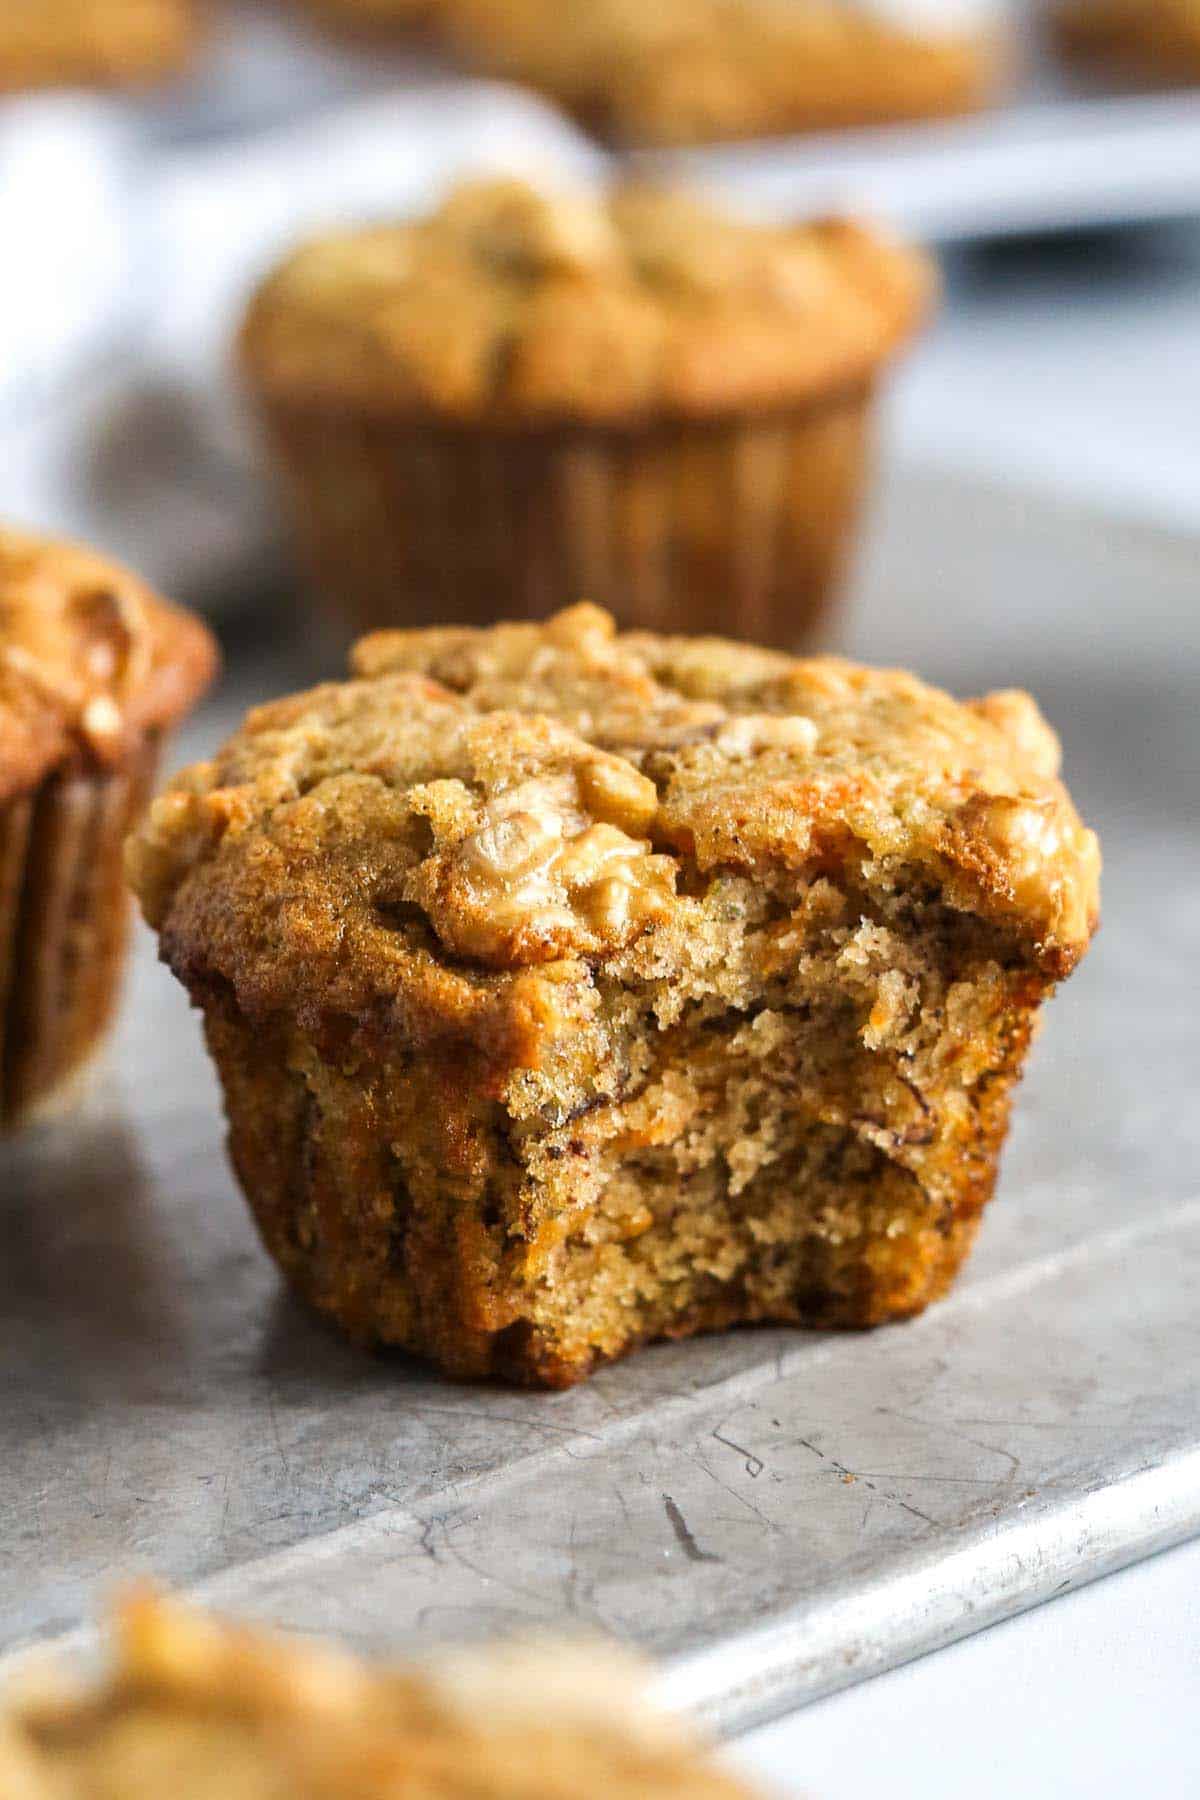 a close up of a banana carrot muffin with a bite taken out of it.